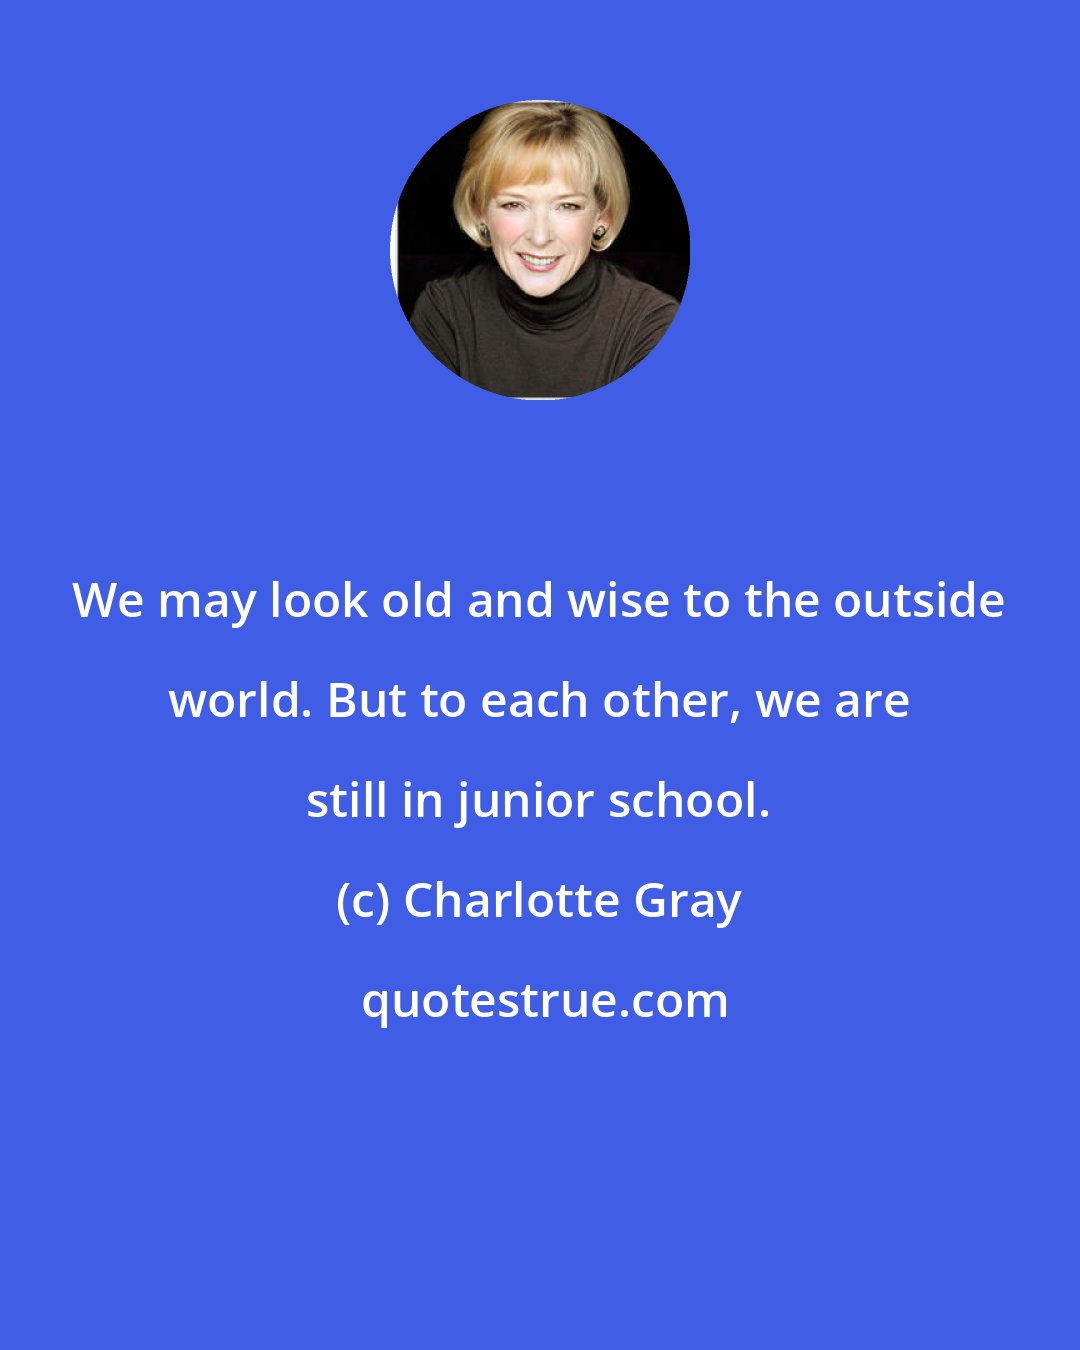 Charlotte Gray: We may look old and wise to the outside world. But to each other, we are still in junior school.